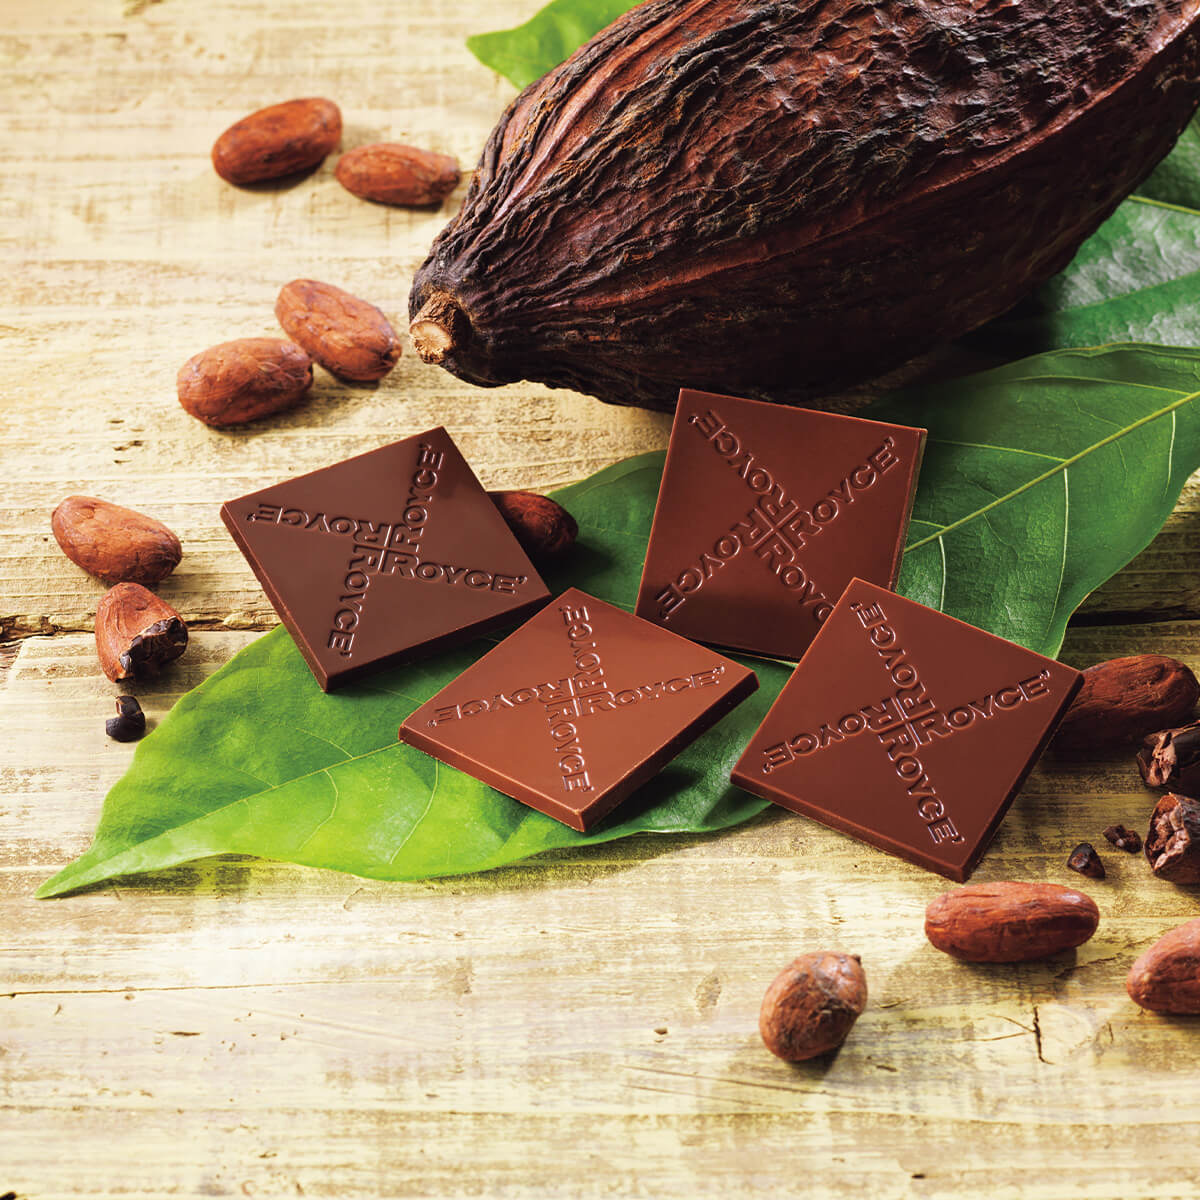 ROYCE' Chocolate - Image shows brown chocolate squares etched with the words ROYCE'. Accents include leaves, loose cacao beans, and a cacao pod.